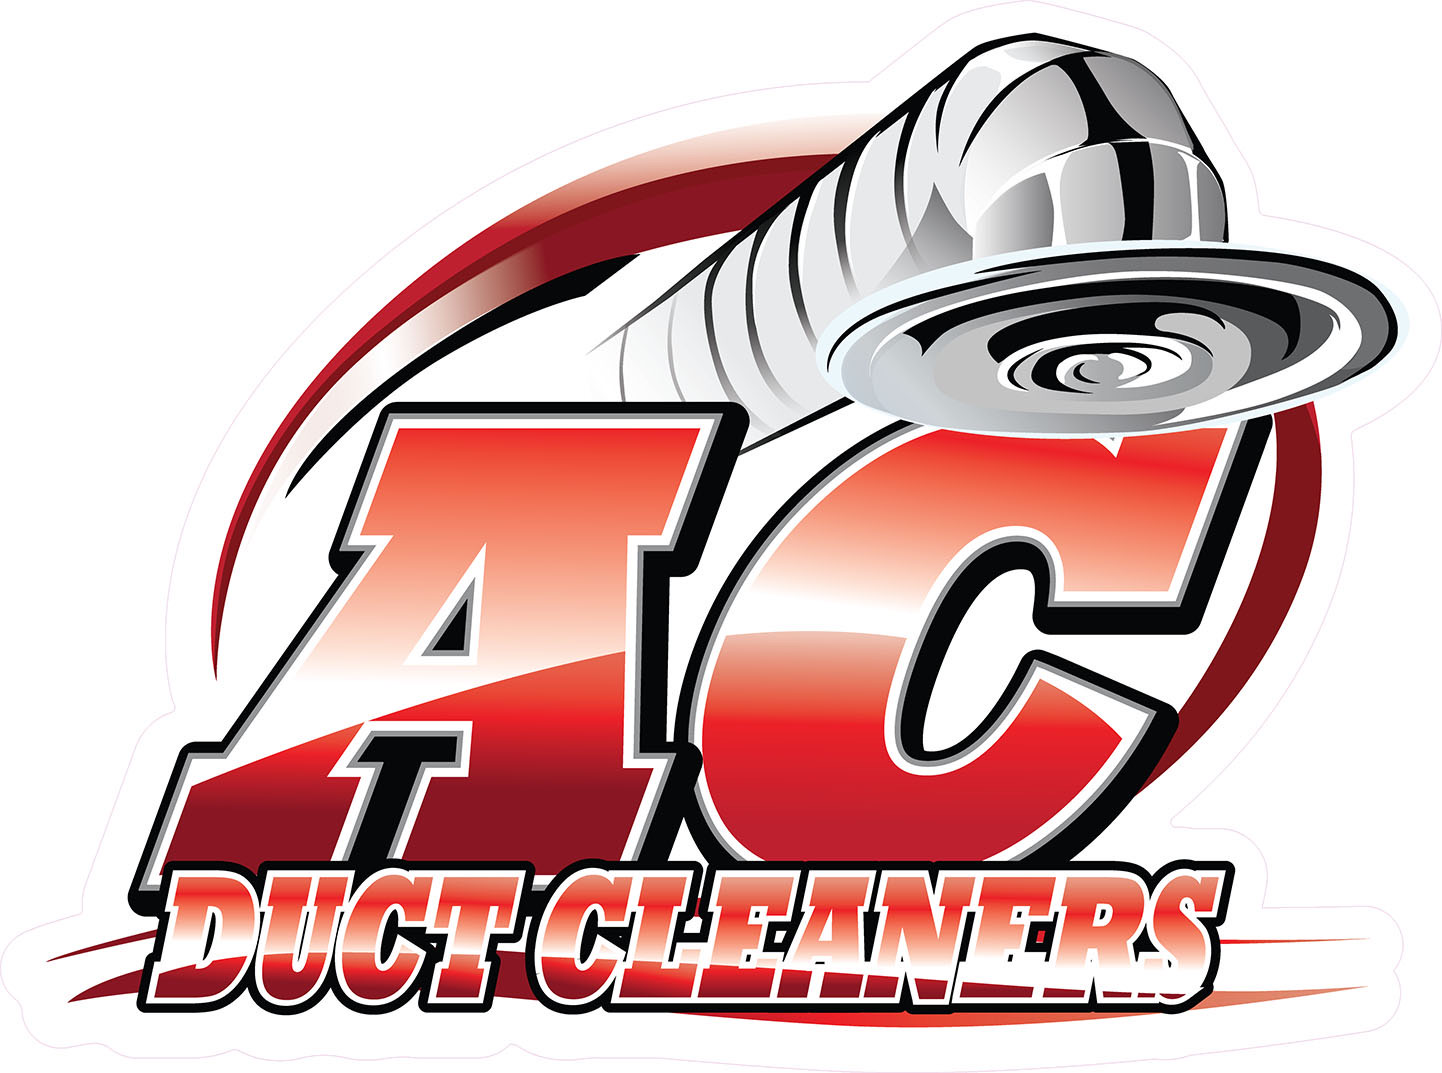 AC Duct Cleaners Logo